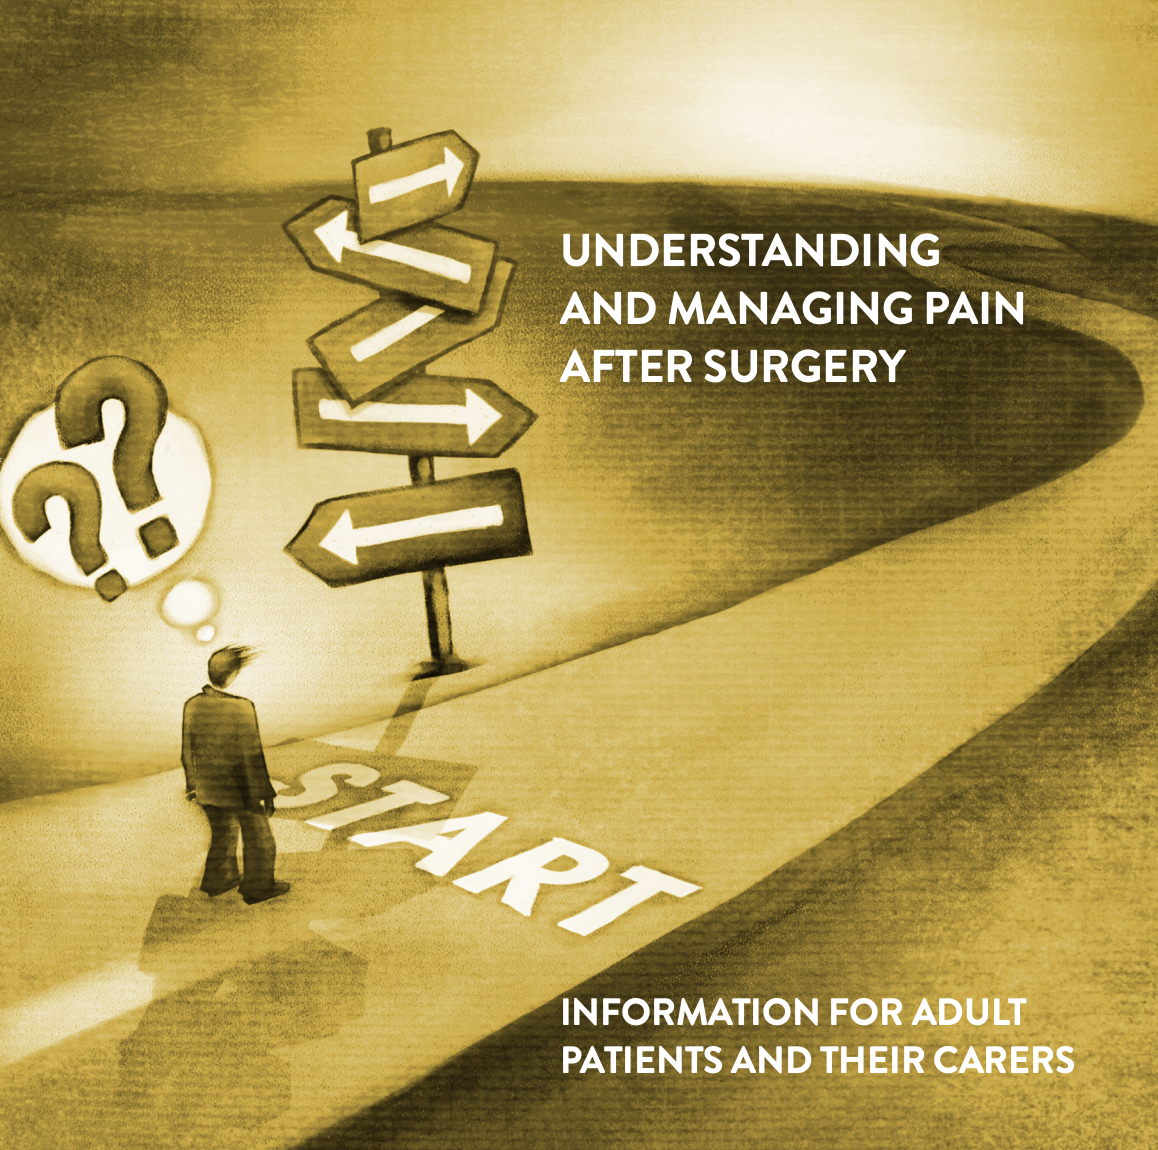 UNDERSTANDING & MANAGING PAIN AFTER SURGERY